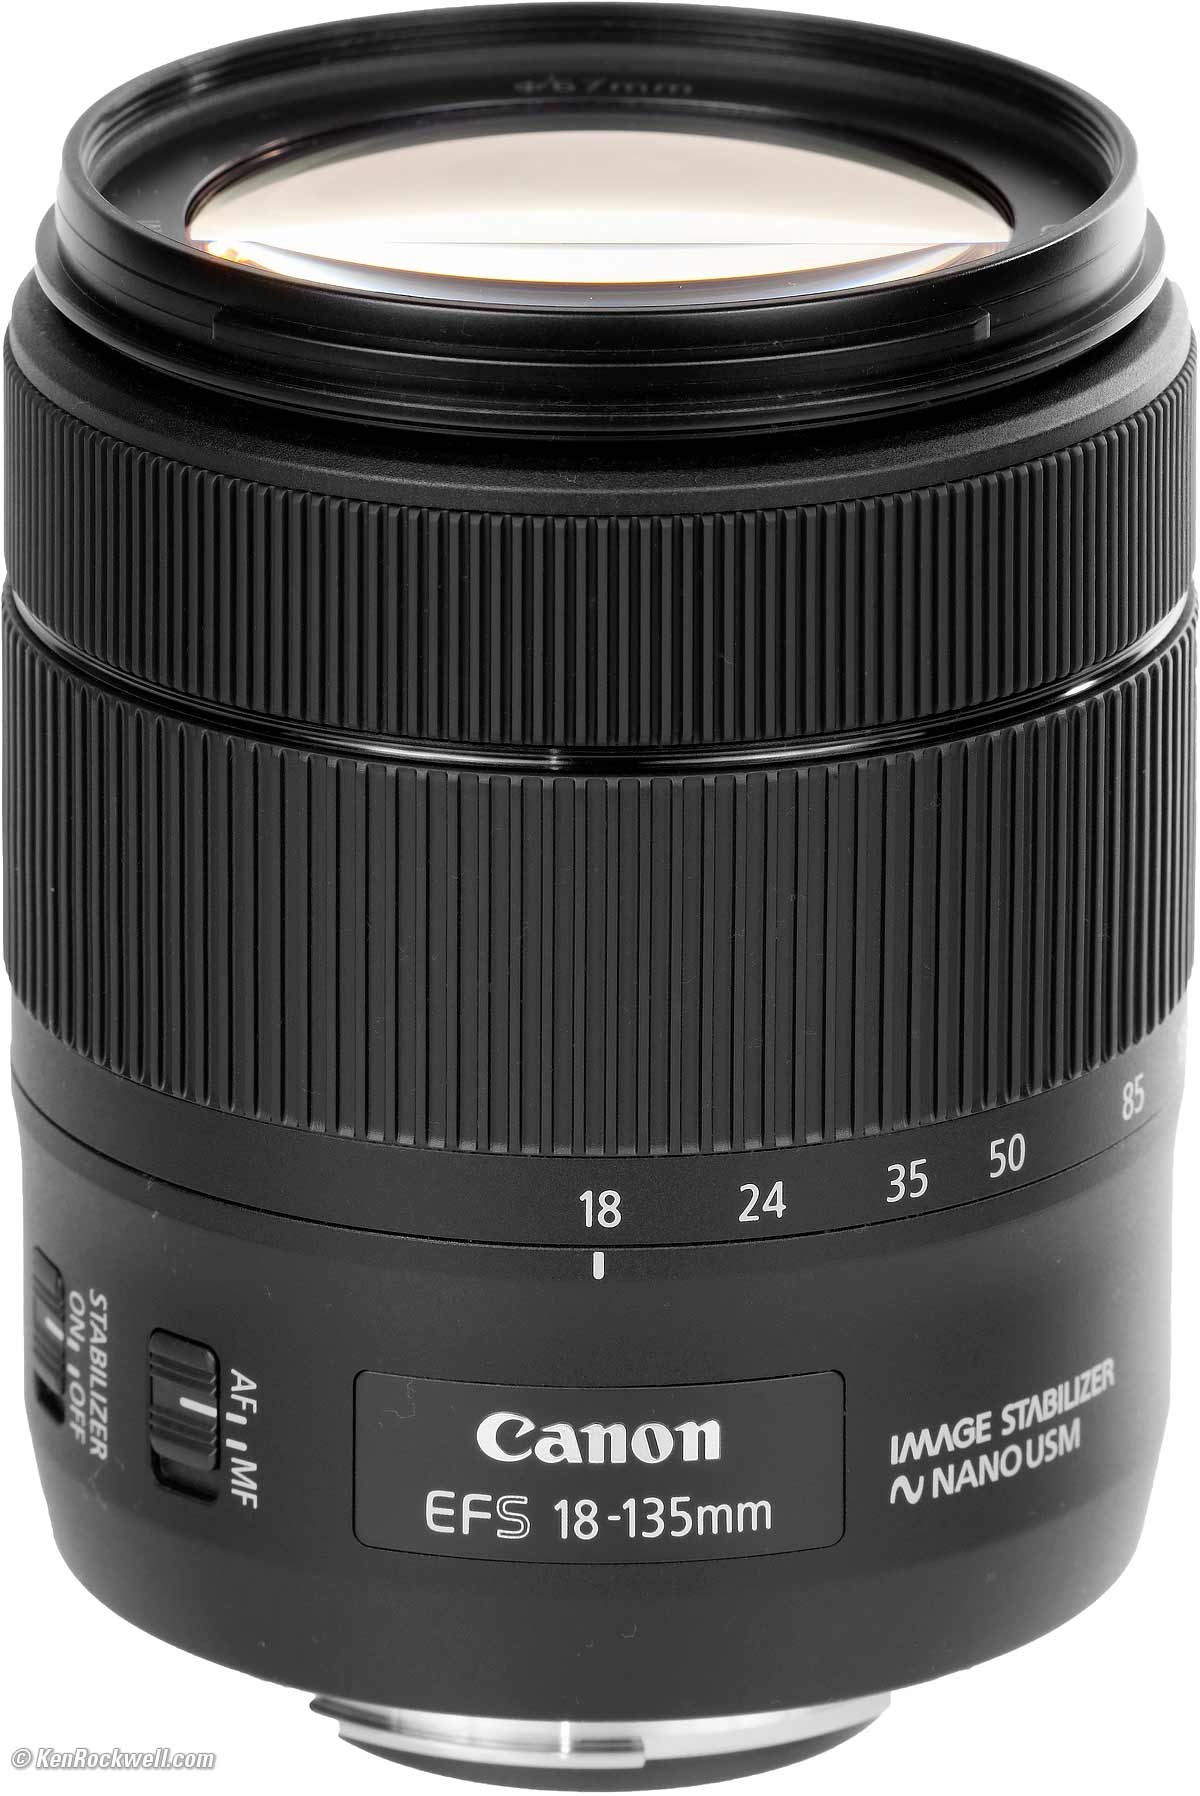 Canon 18-135mm USM Review